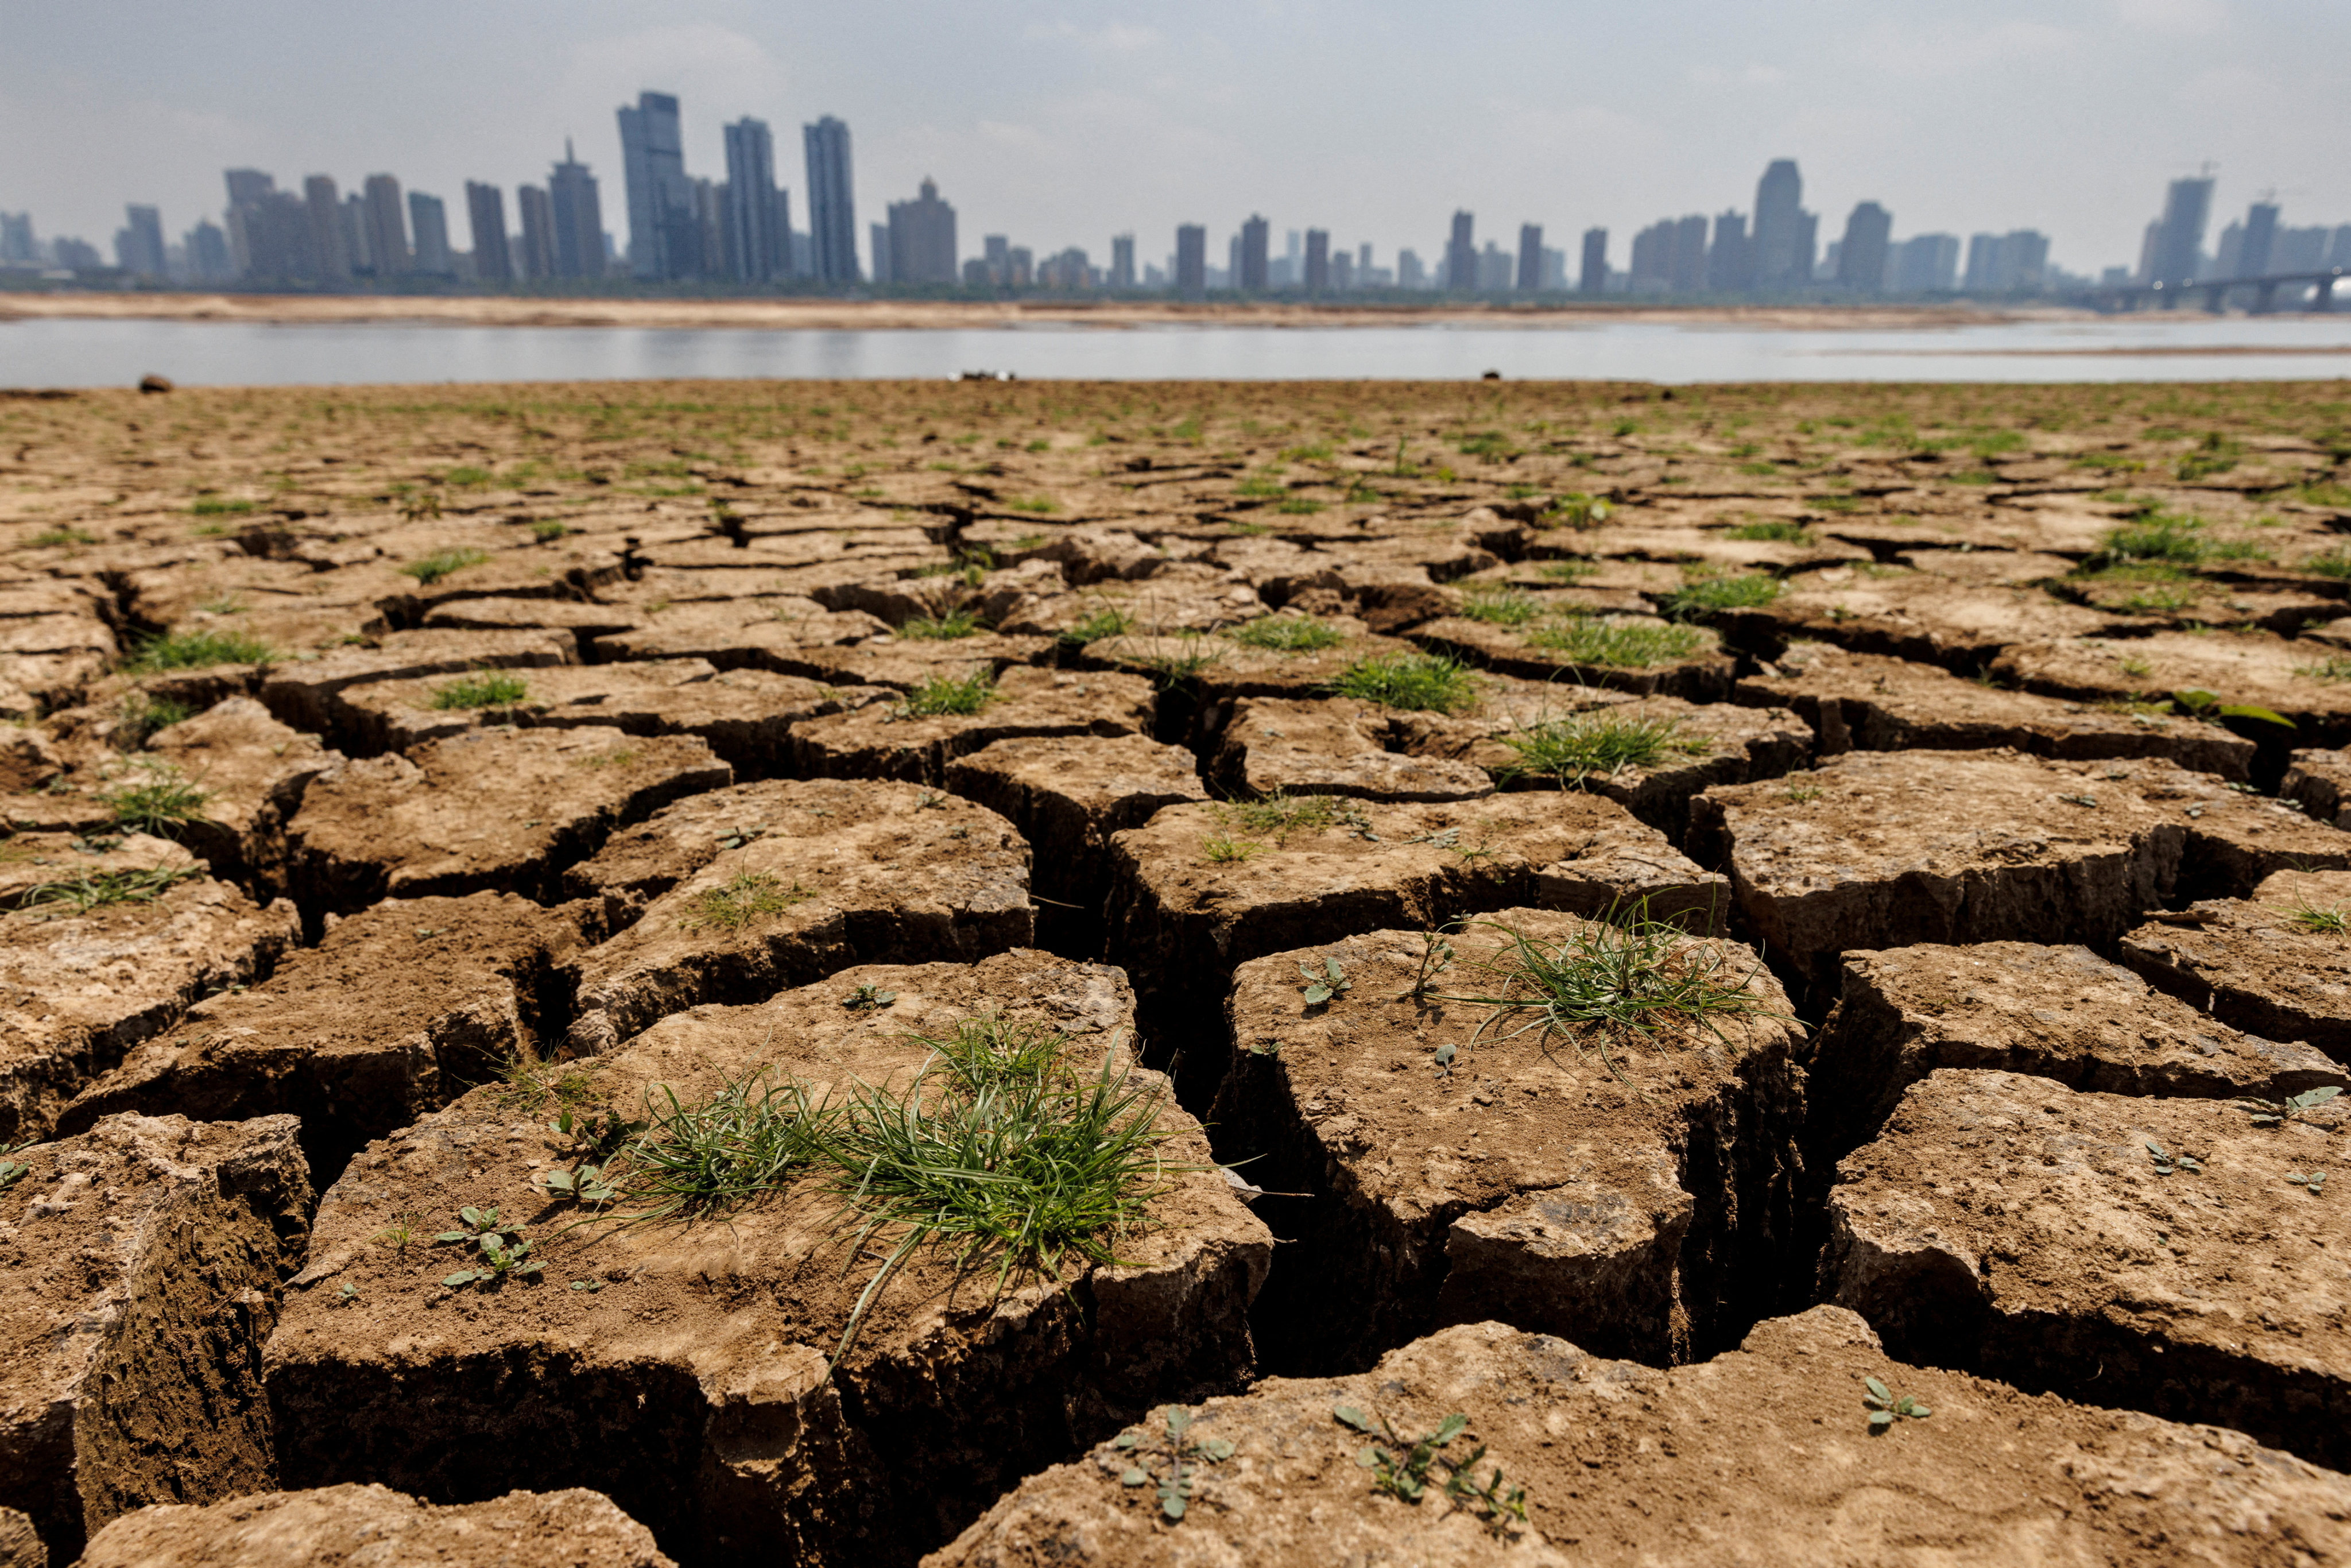 Cracks run through the partially dried-up river bed of the Gan River, during a regional drought in Nanchang, Jiangxi province, August 28, 2022. Photo: Reuters